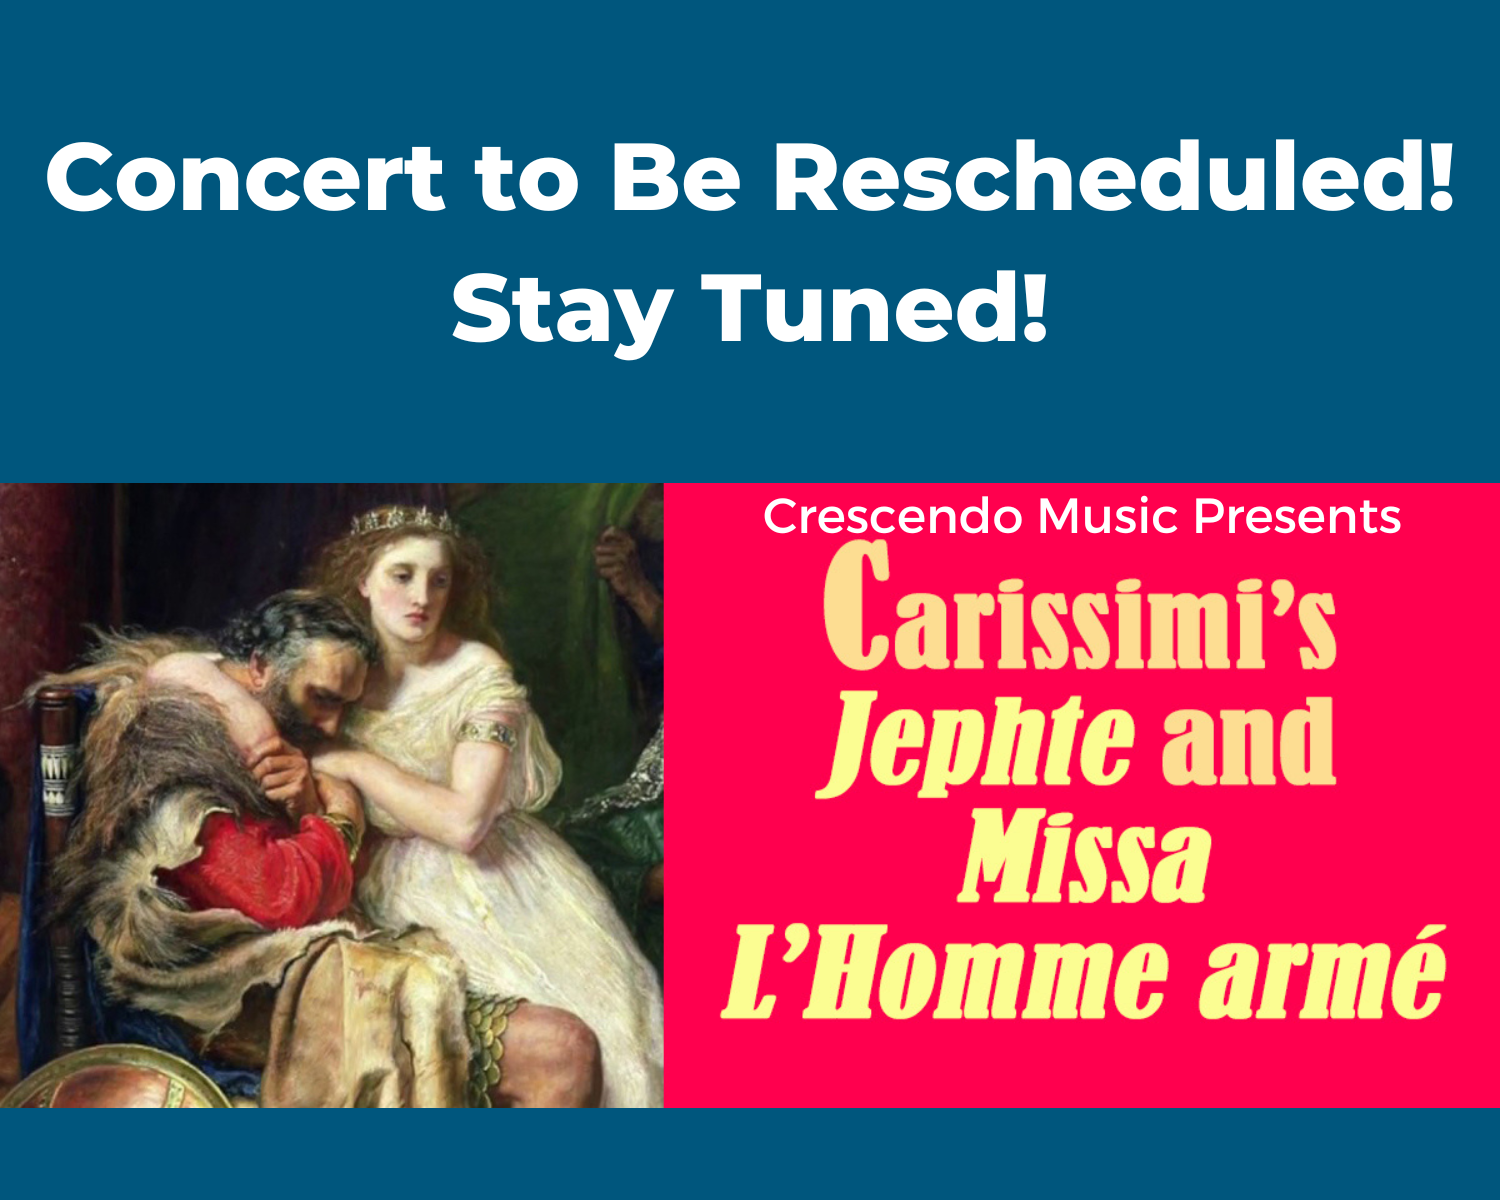 To Be Rescheduled: Carissimi’s Jephte and Missa L’Homme armé